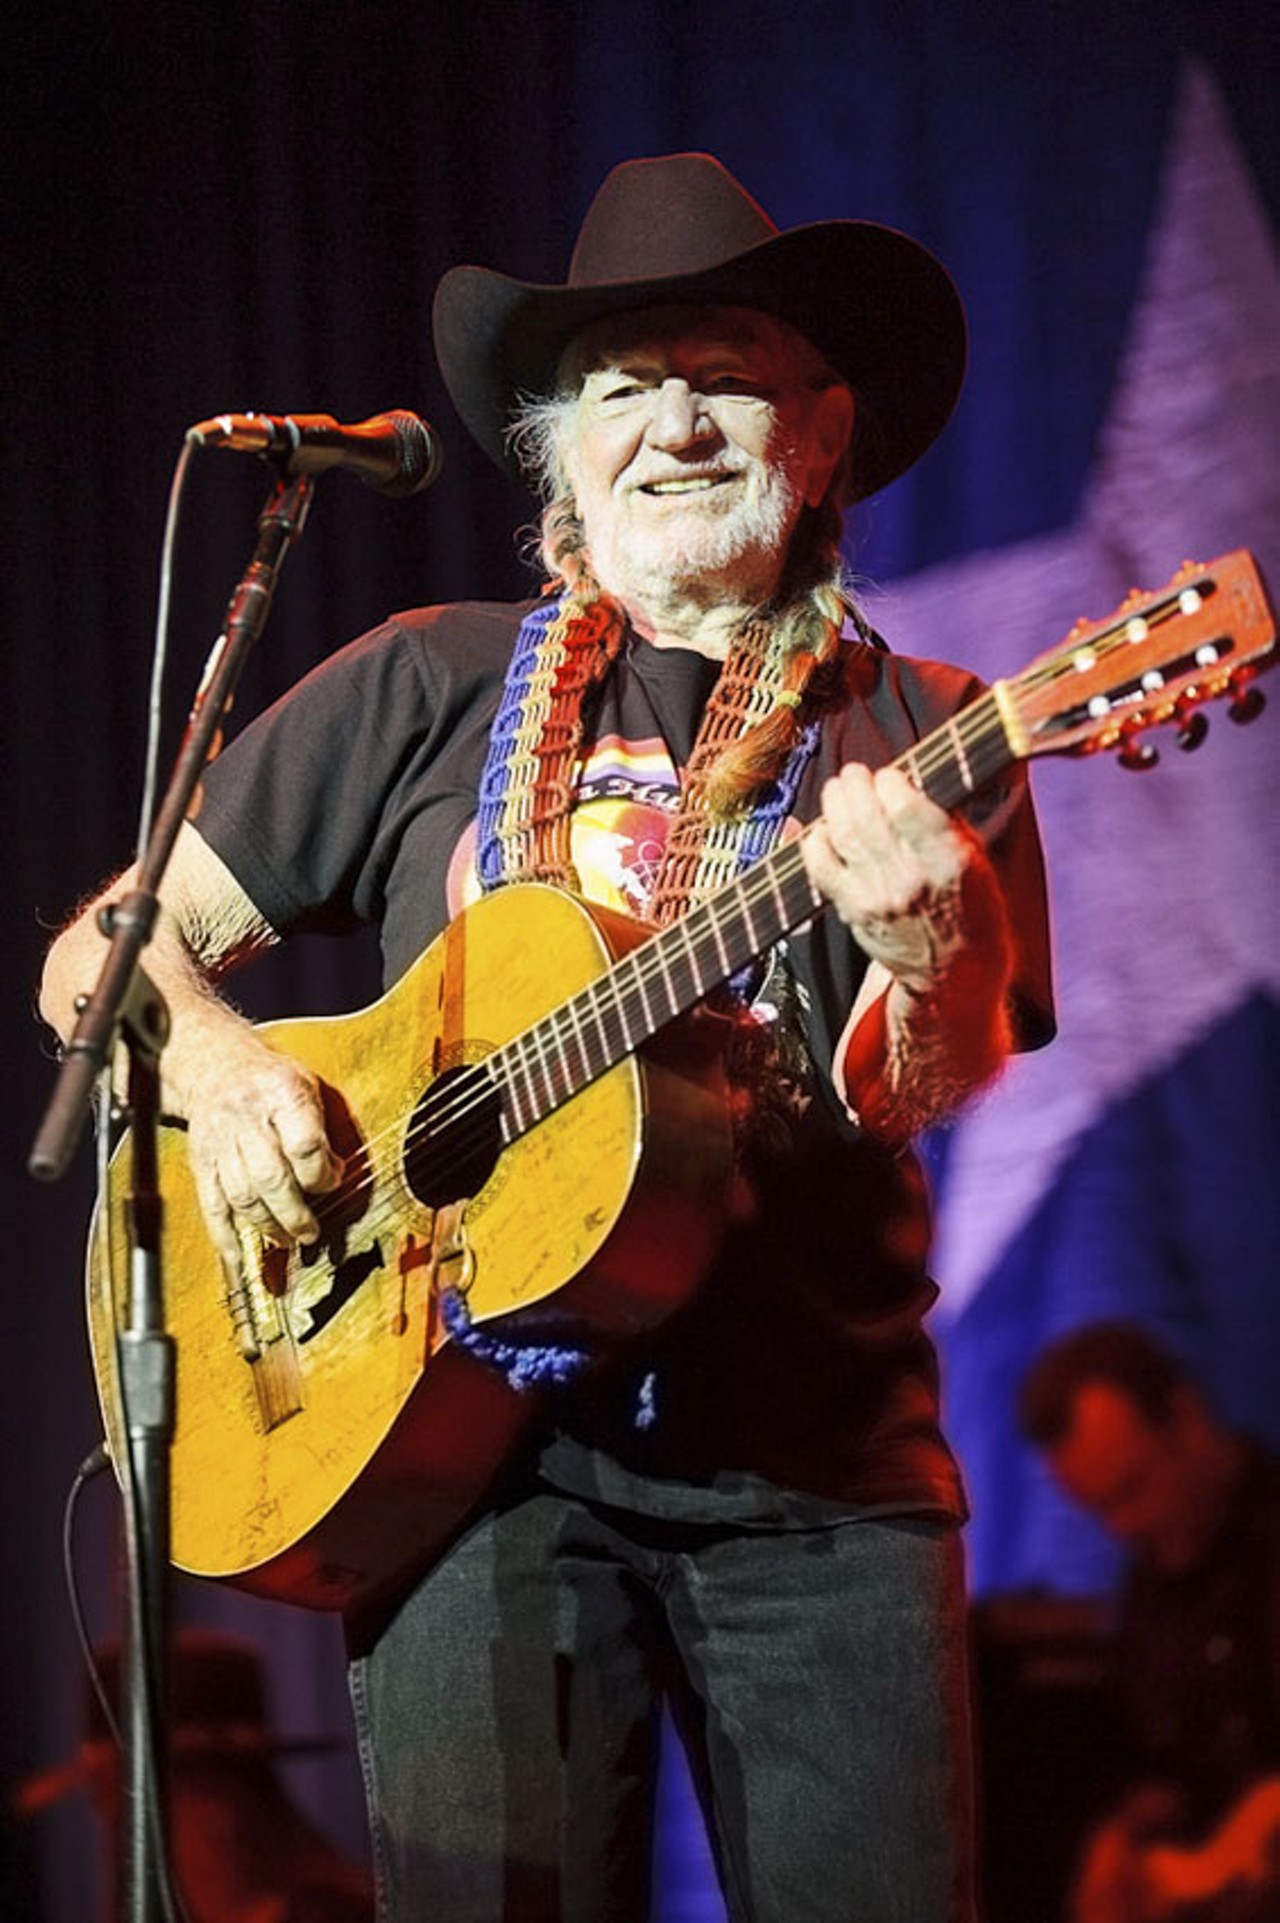 Willie Nelson performing at the Pageant in St. Louis on April 17, 2012.